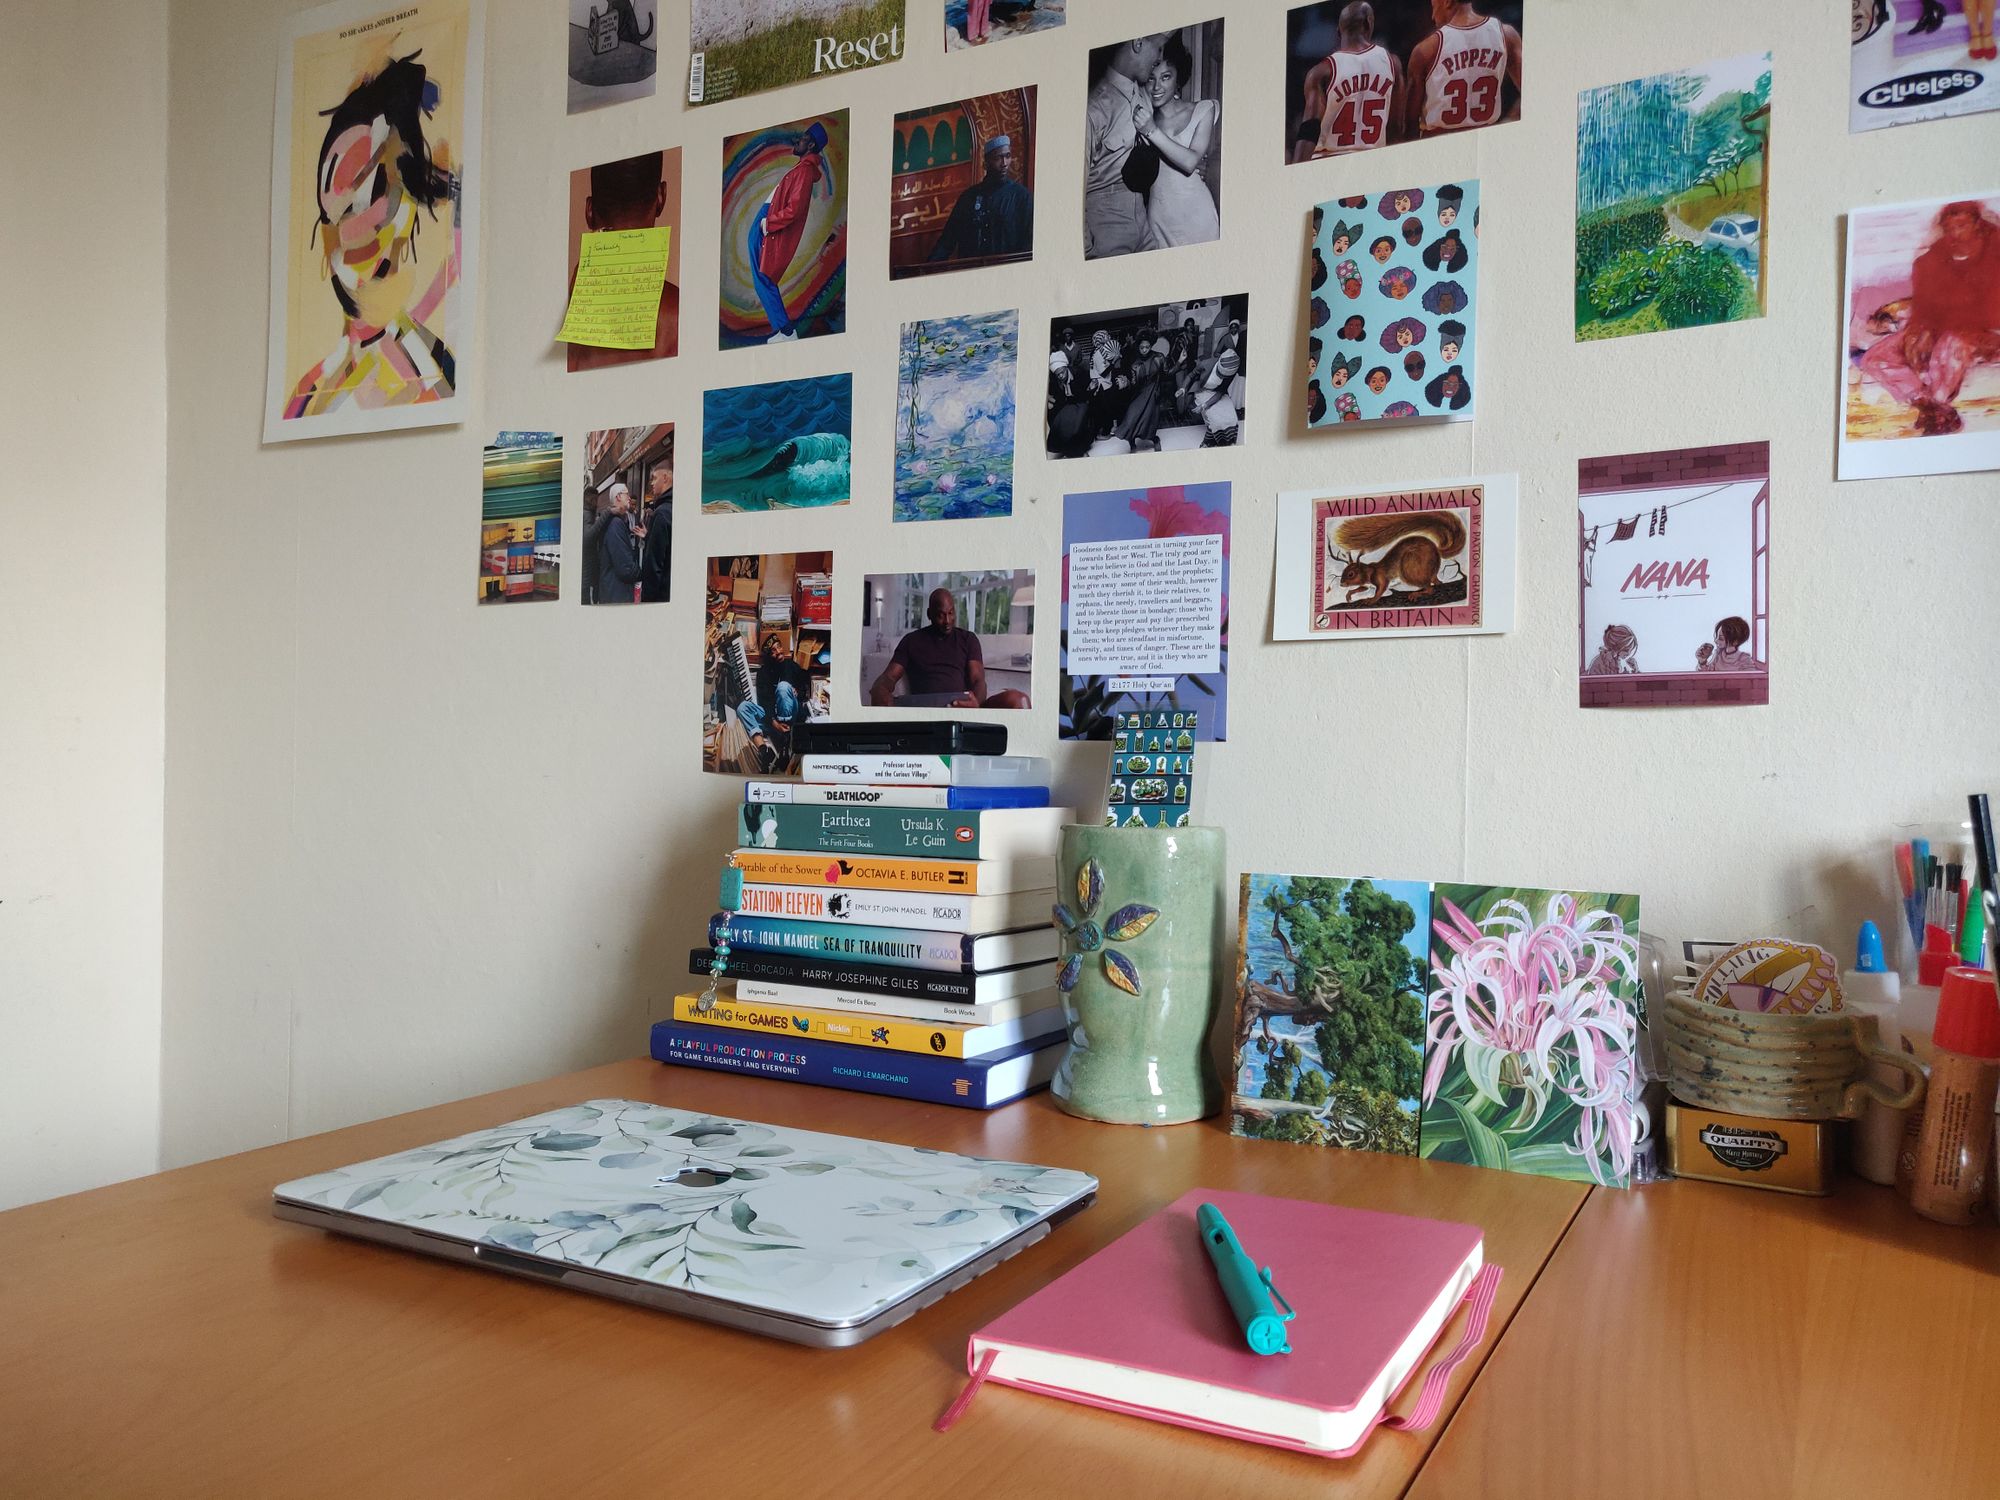 Halima's work desk with laptop, notebook and pen. Stacks of books are on the desk as well as stationery and colourful posters are on the wall.